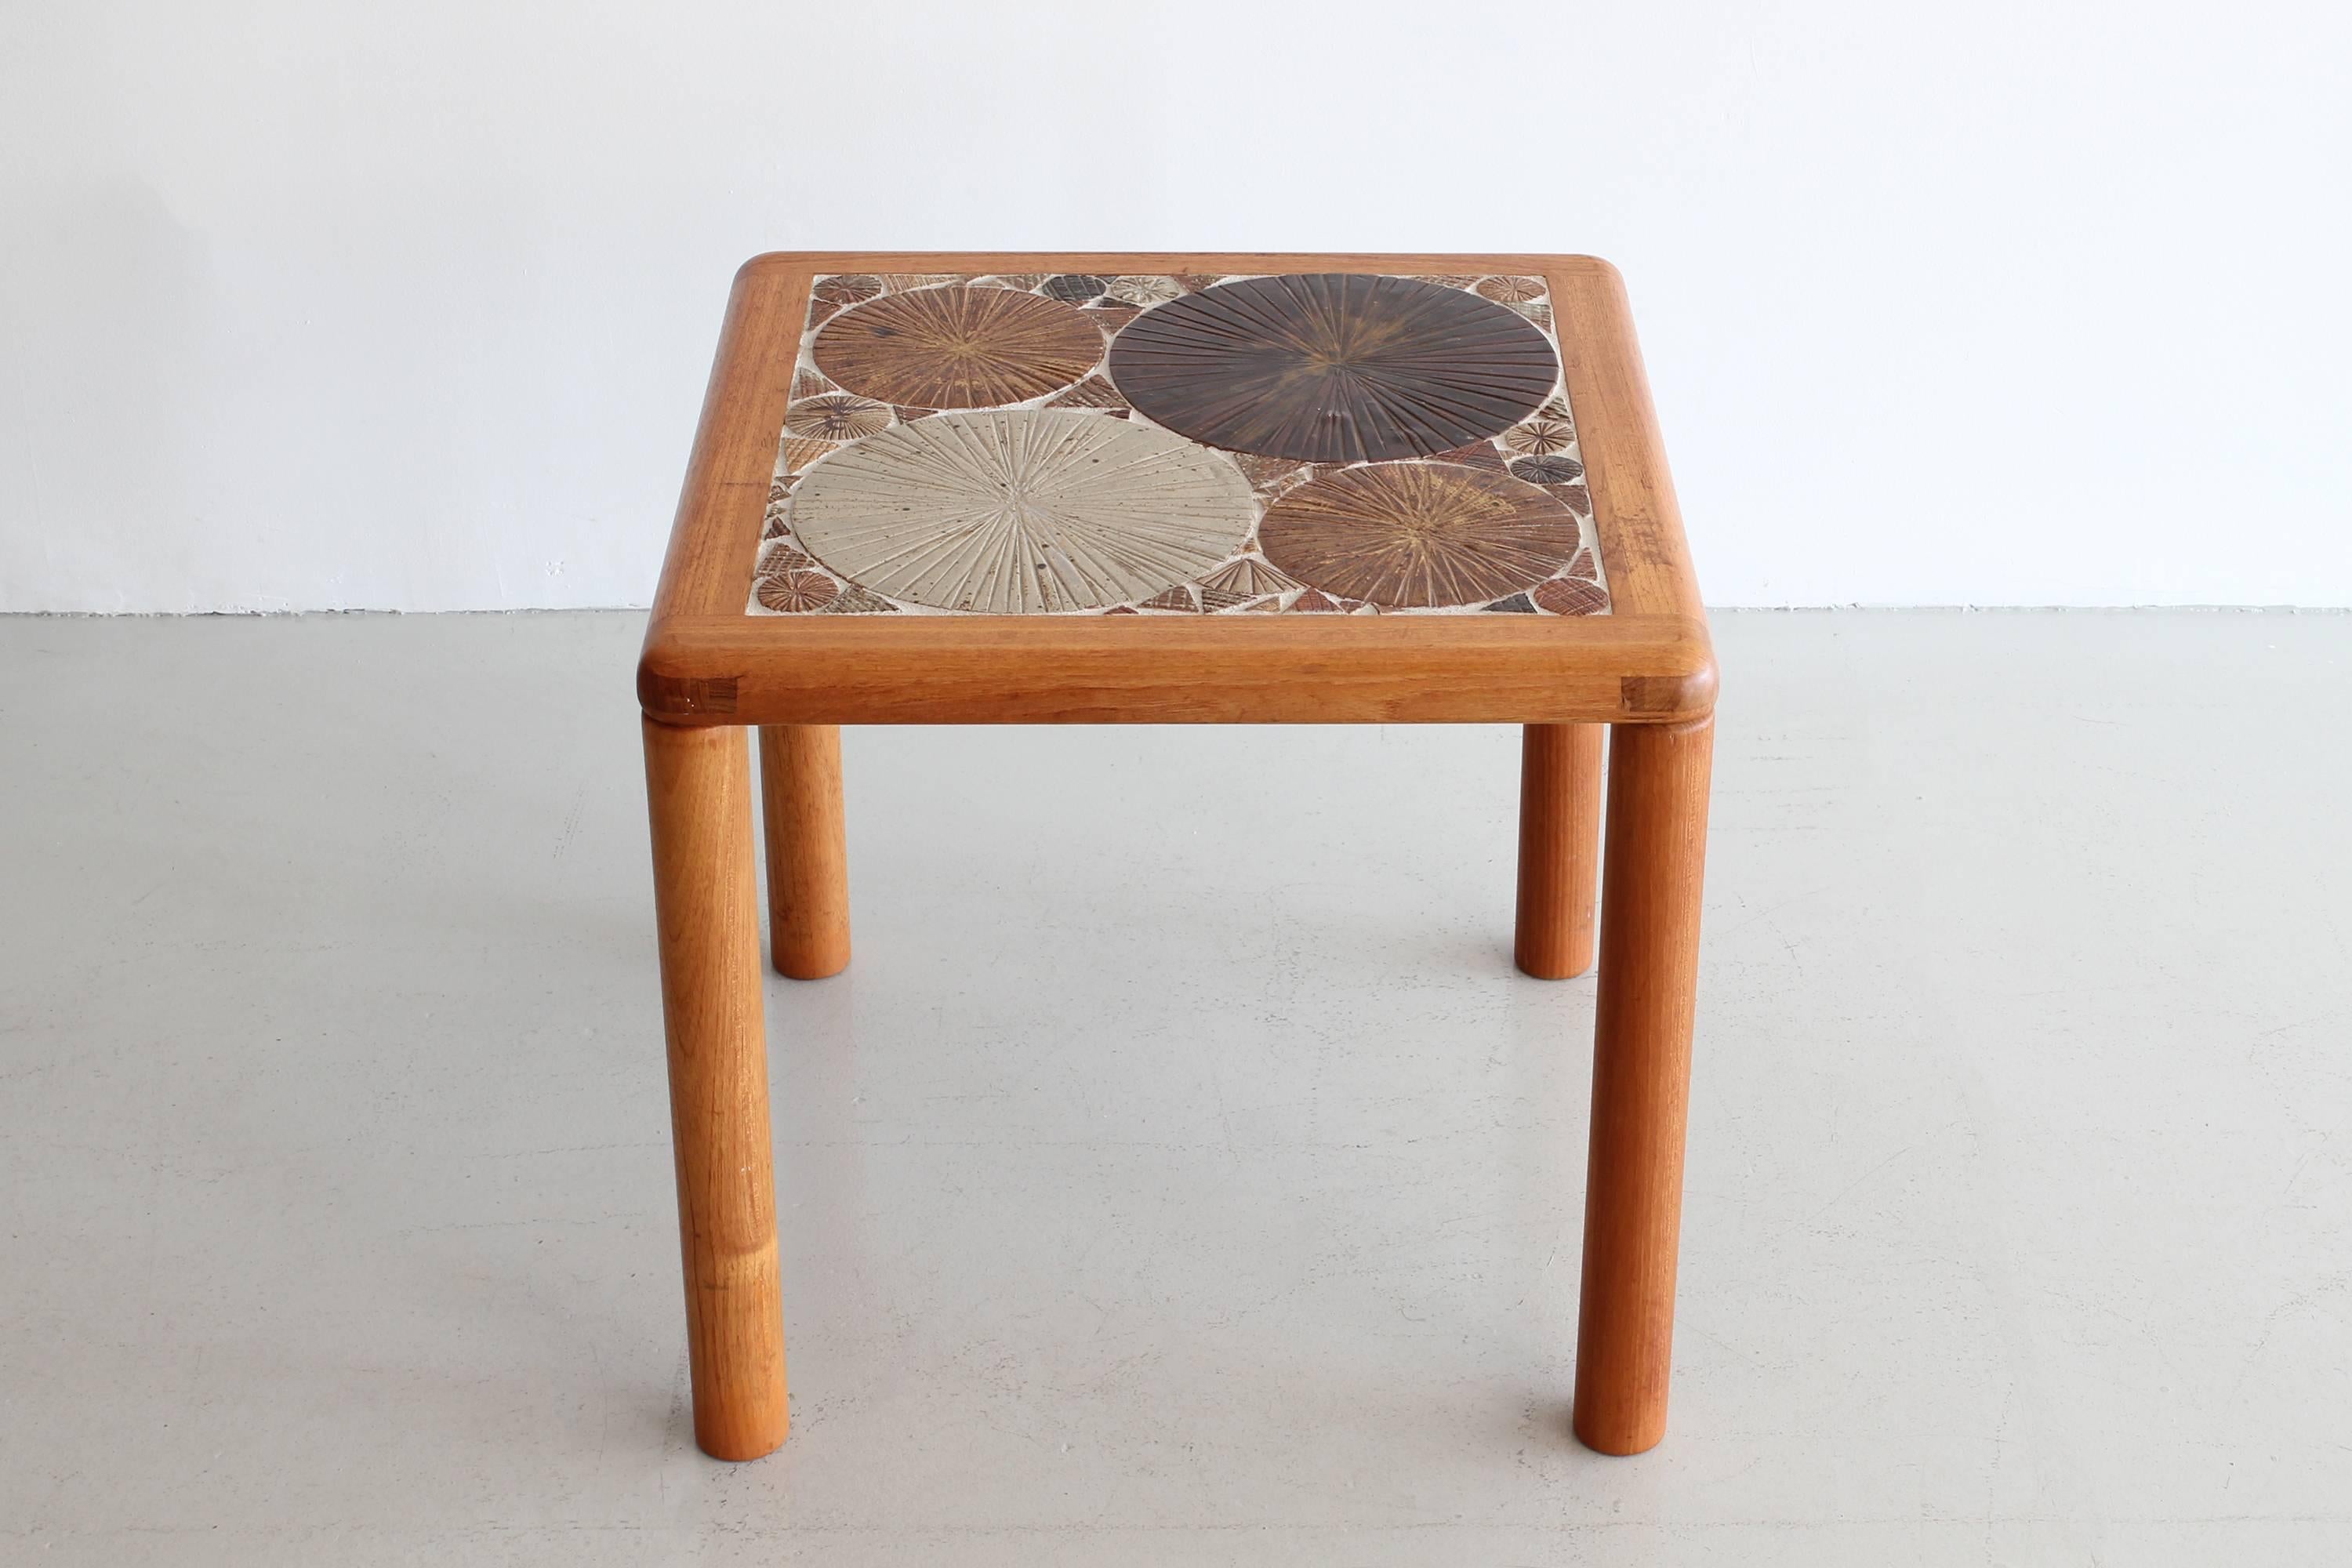 Etched Pair of Tile End Tables by Tue Poulsen